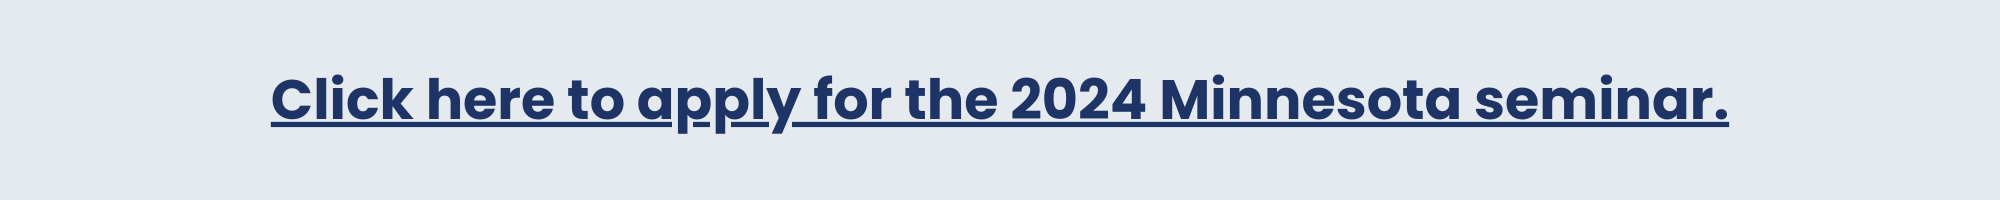 Click here to apply for the 2024 Minnesota seminar.